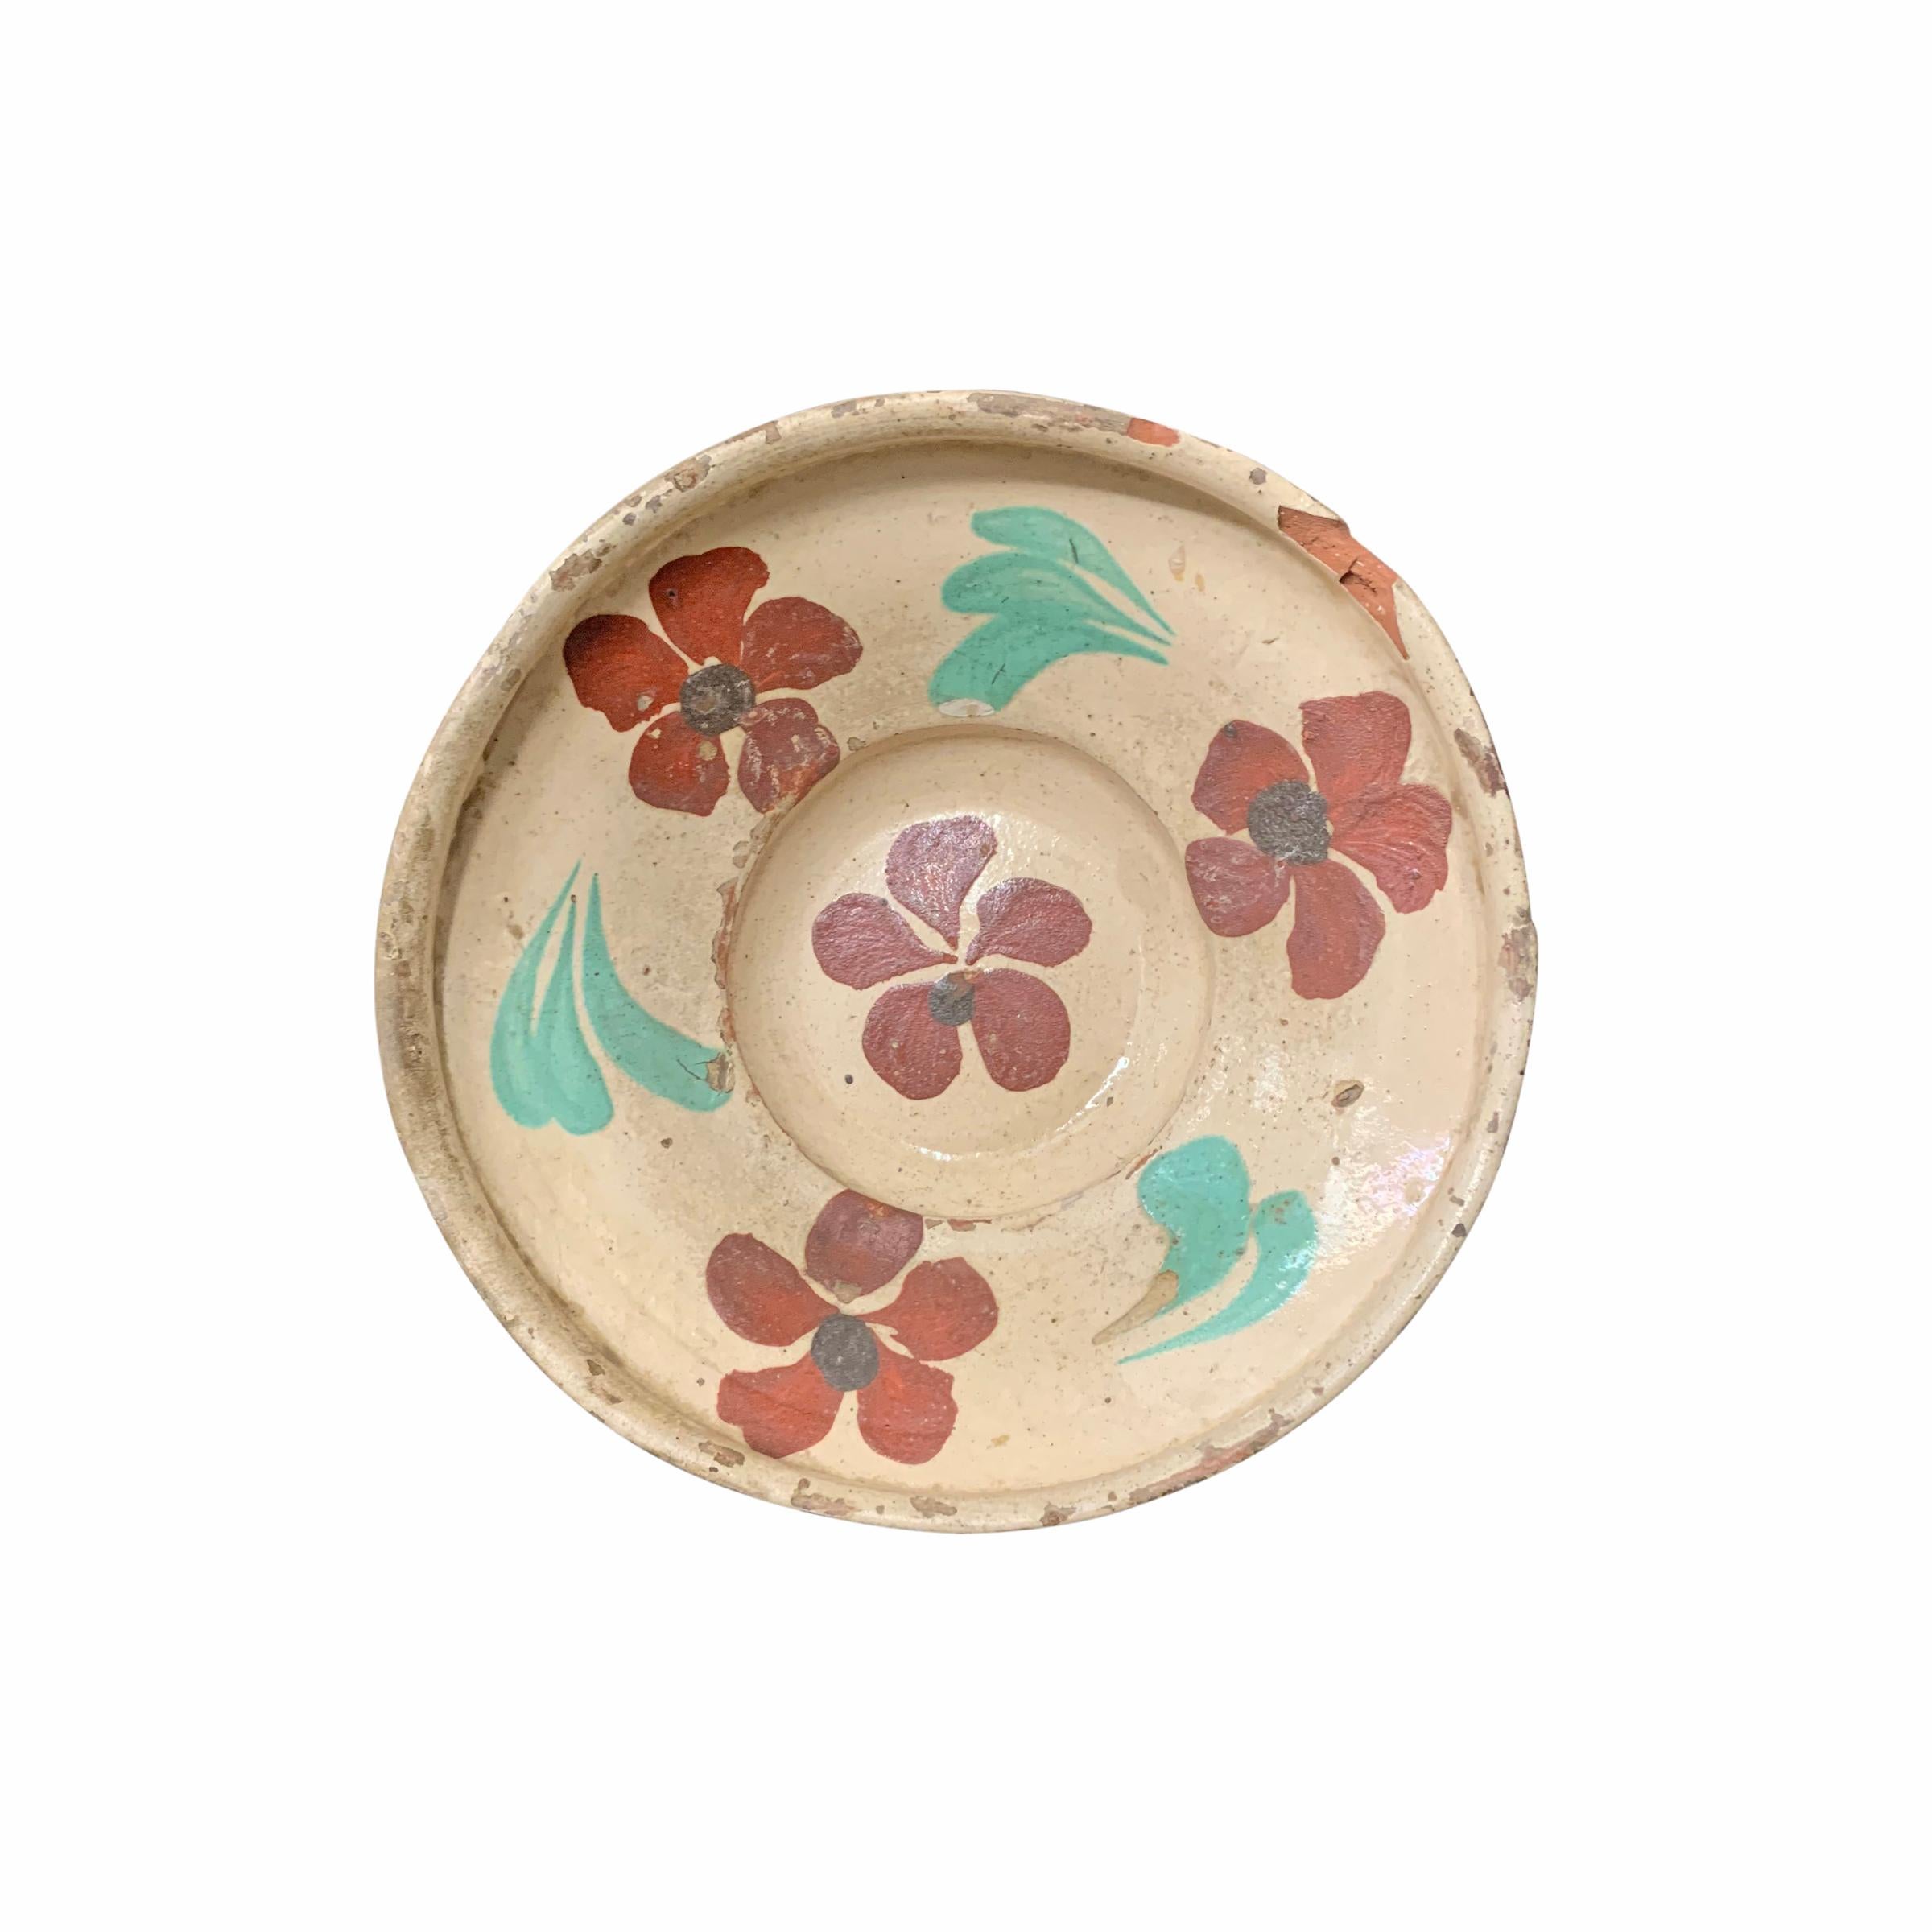 A fantastic and rare set of twelve 19th century Hungarian folk ceramic bowls, each slip glaze painted with unique floral patterns in various colors. Each bowl has the original string on the back which was used to hang the bowl on a wall in the